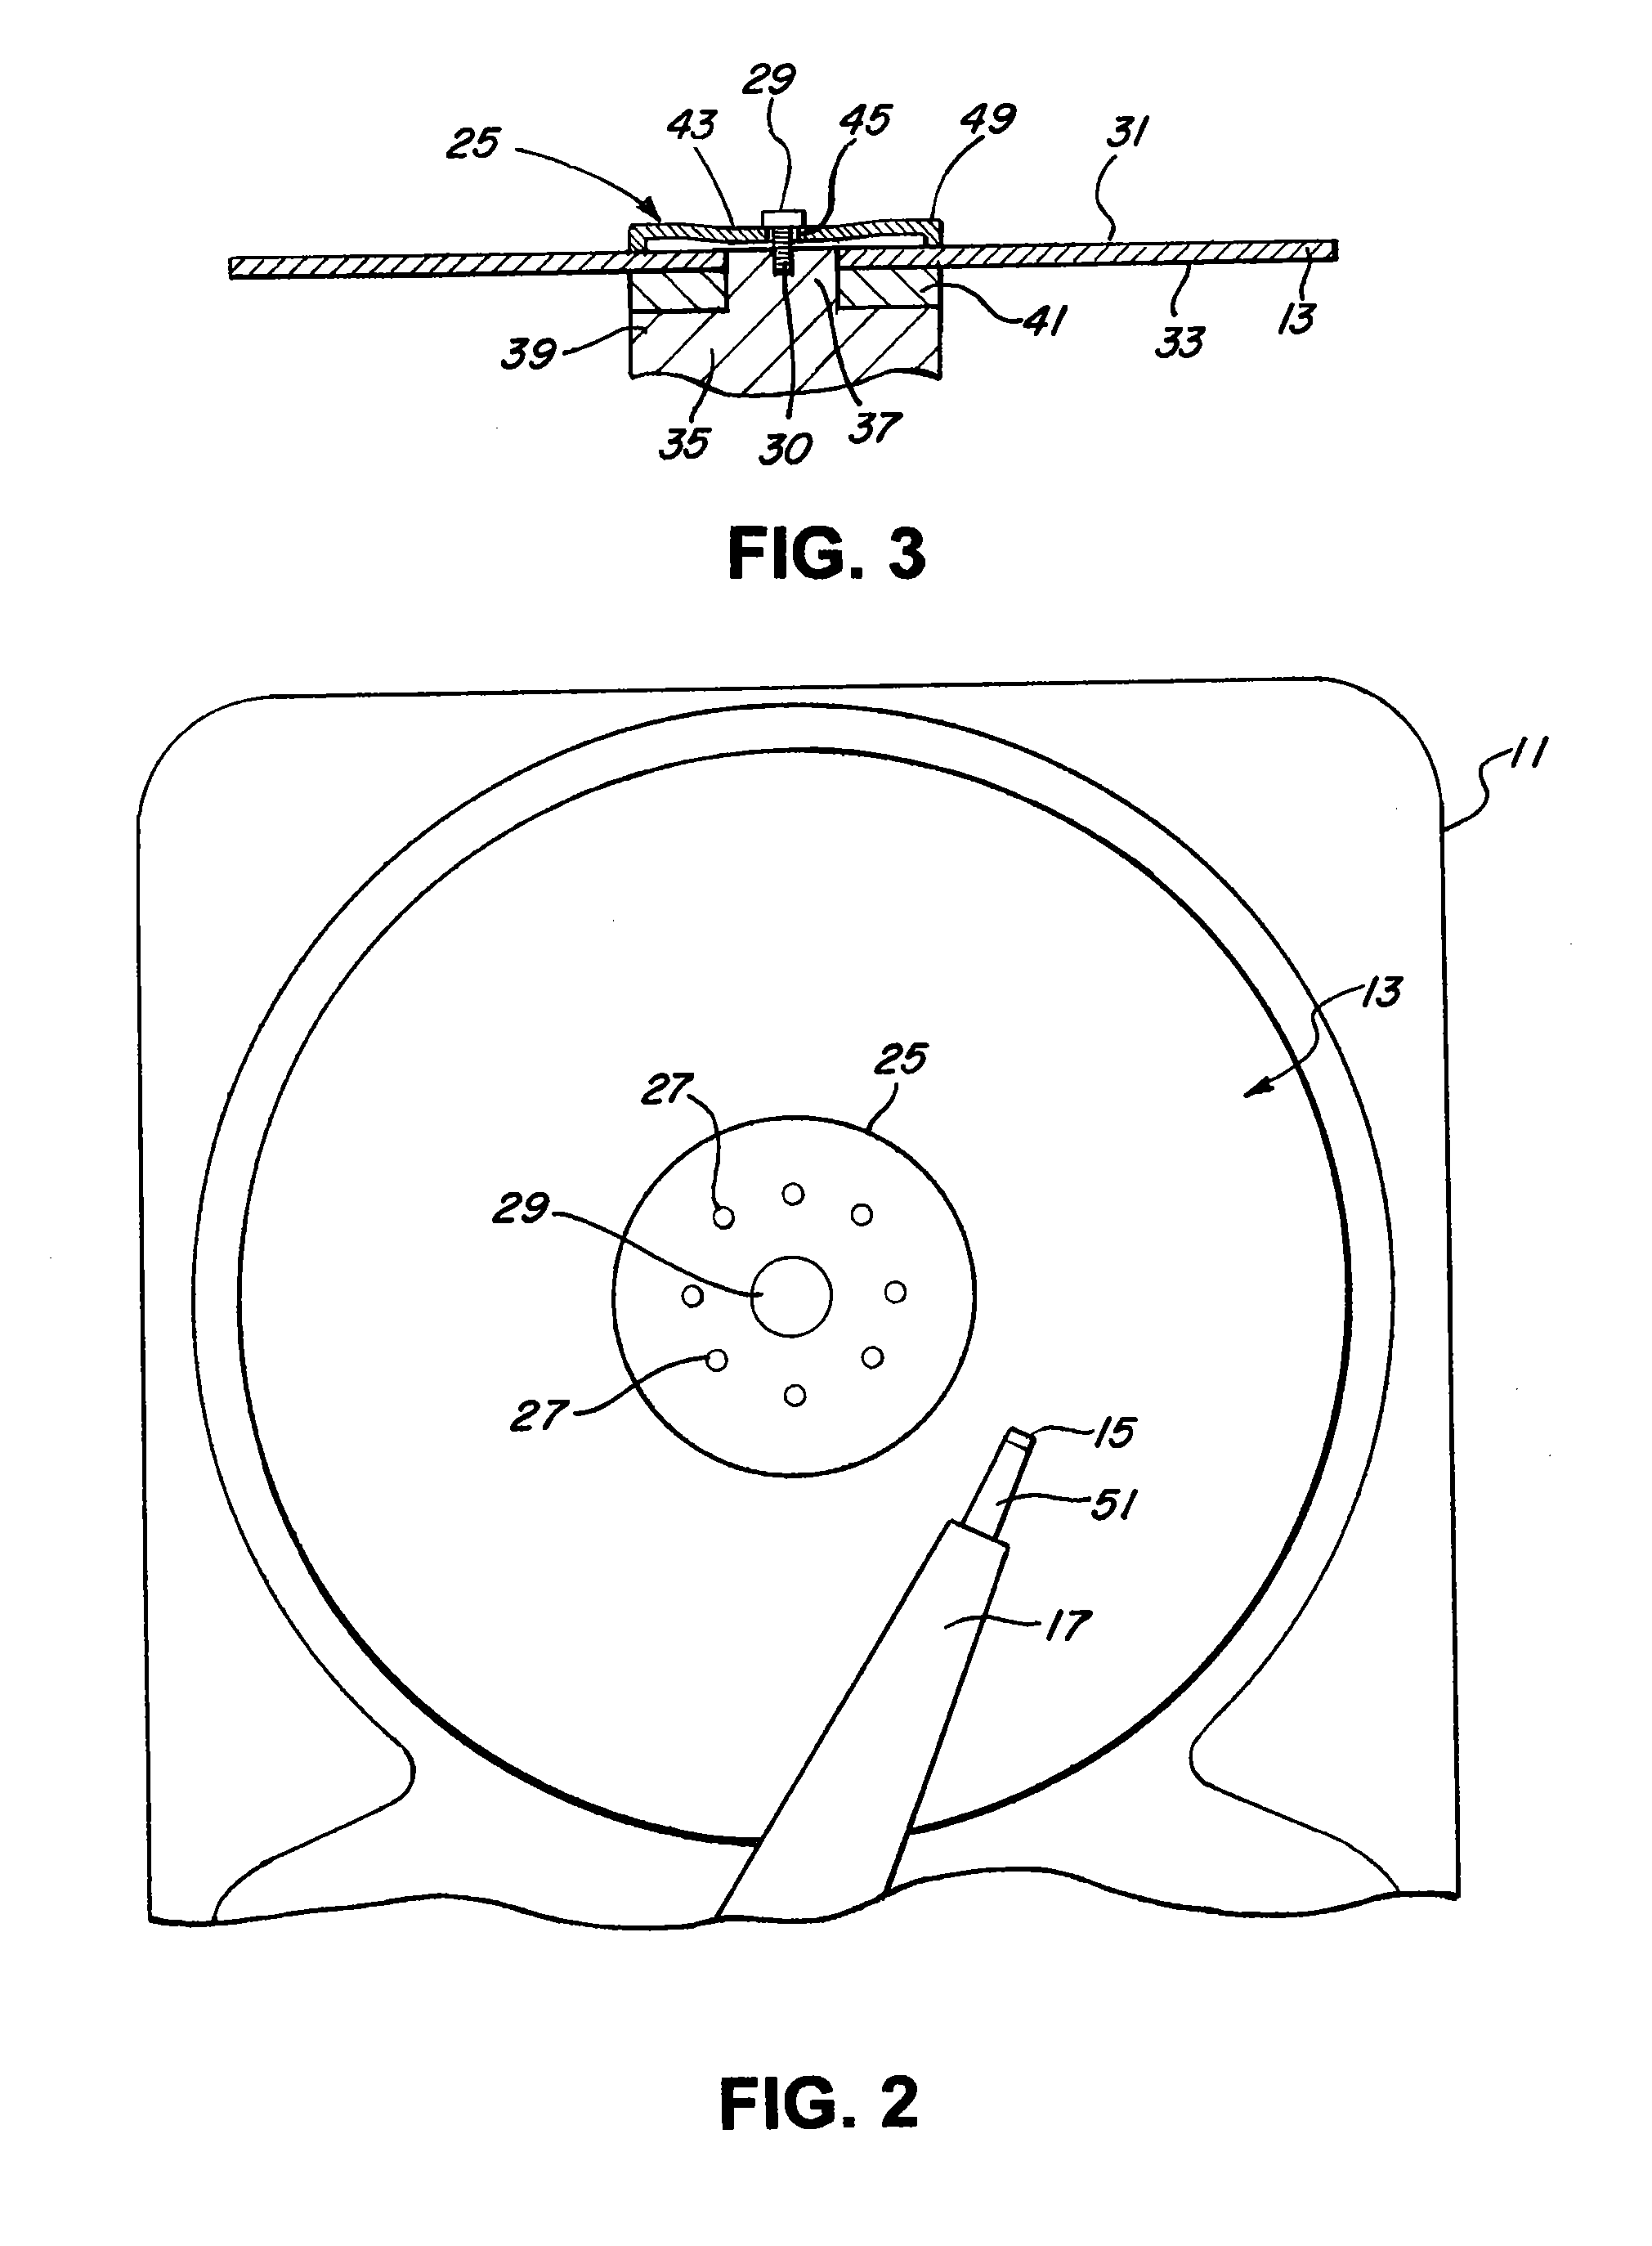 Disk clamp having uniform clamping load and index mark